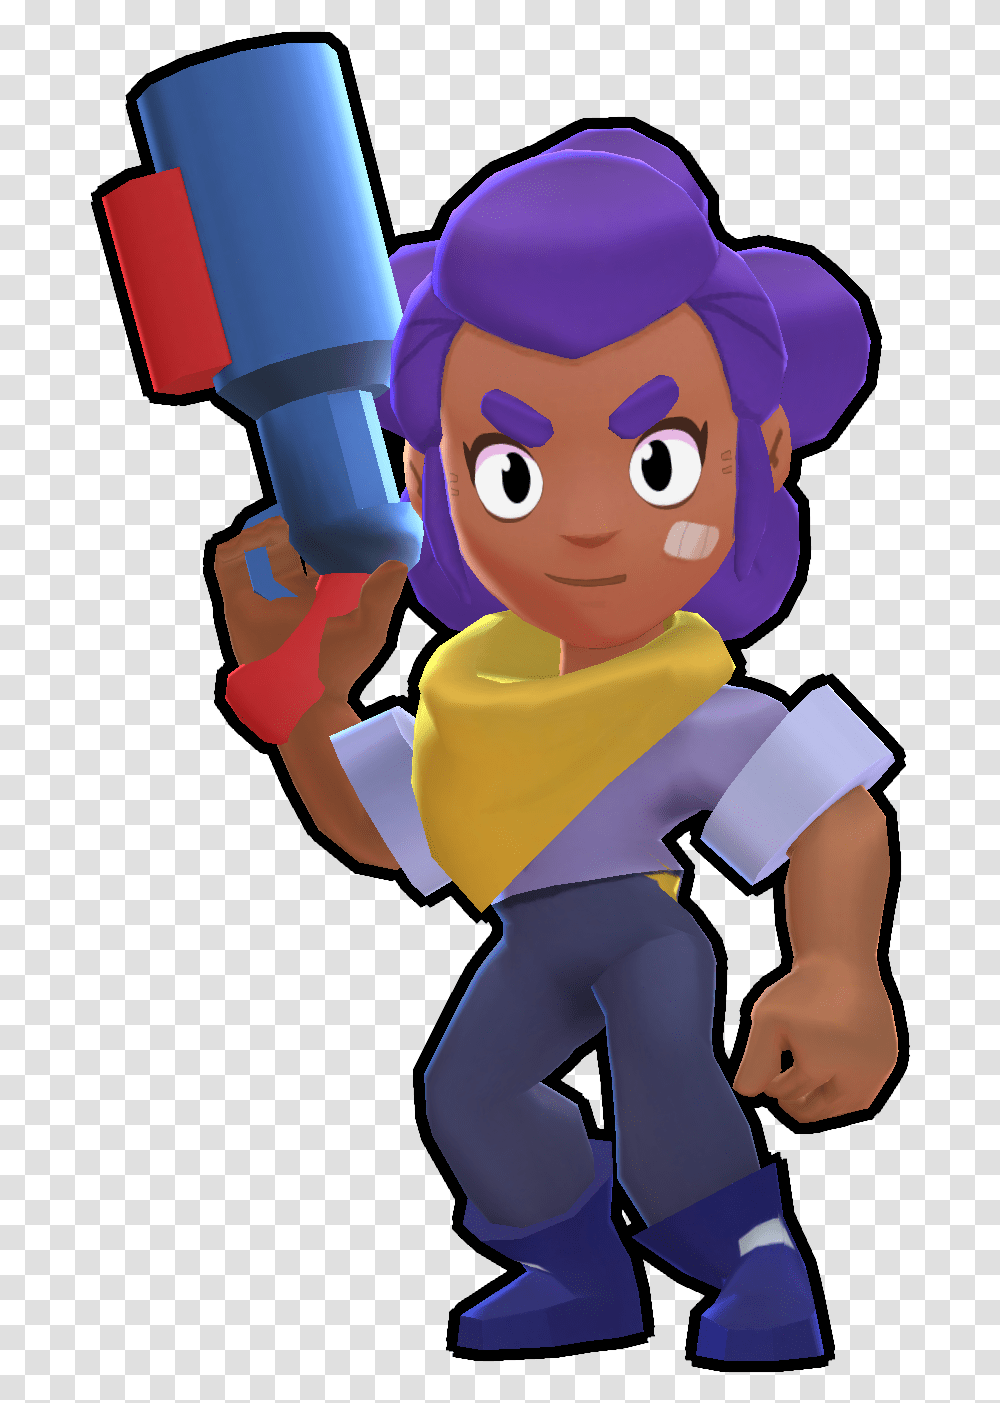 Penny Clipart Image Shelly Skin Default Brawl Brawl Stars Shelly, Person, Photography, People, Portrait Transparent Png